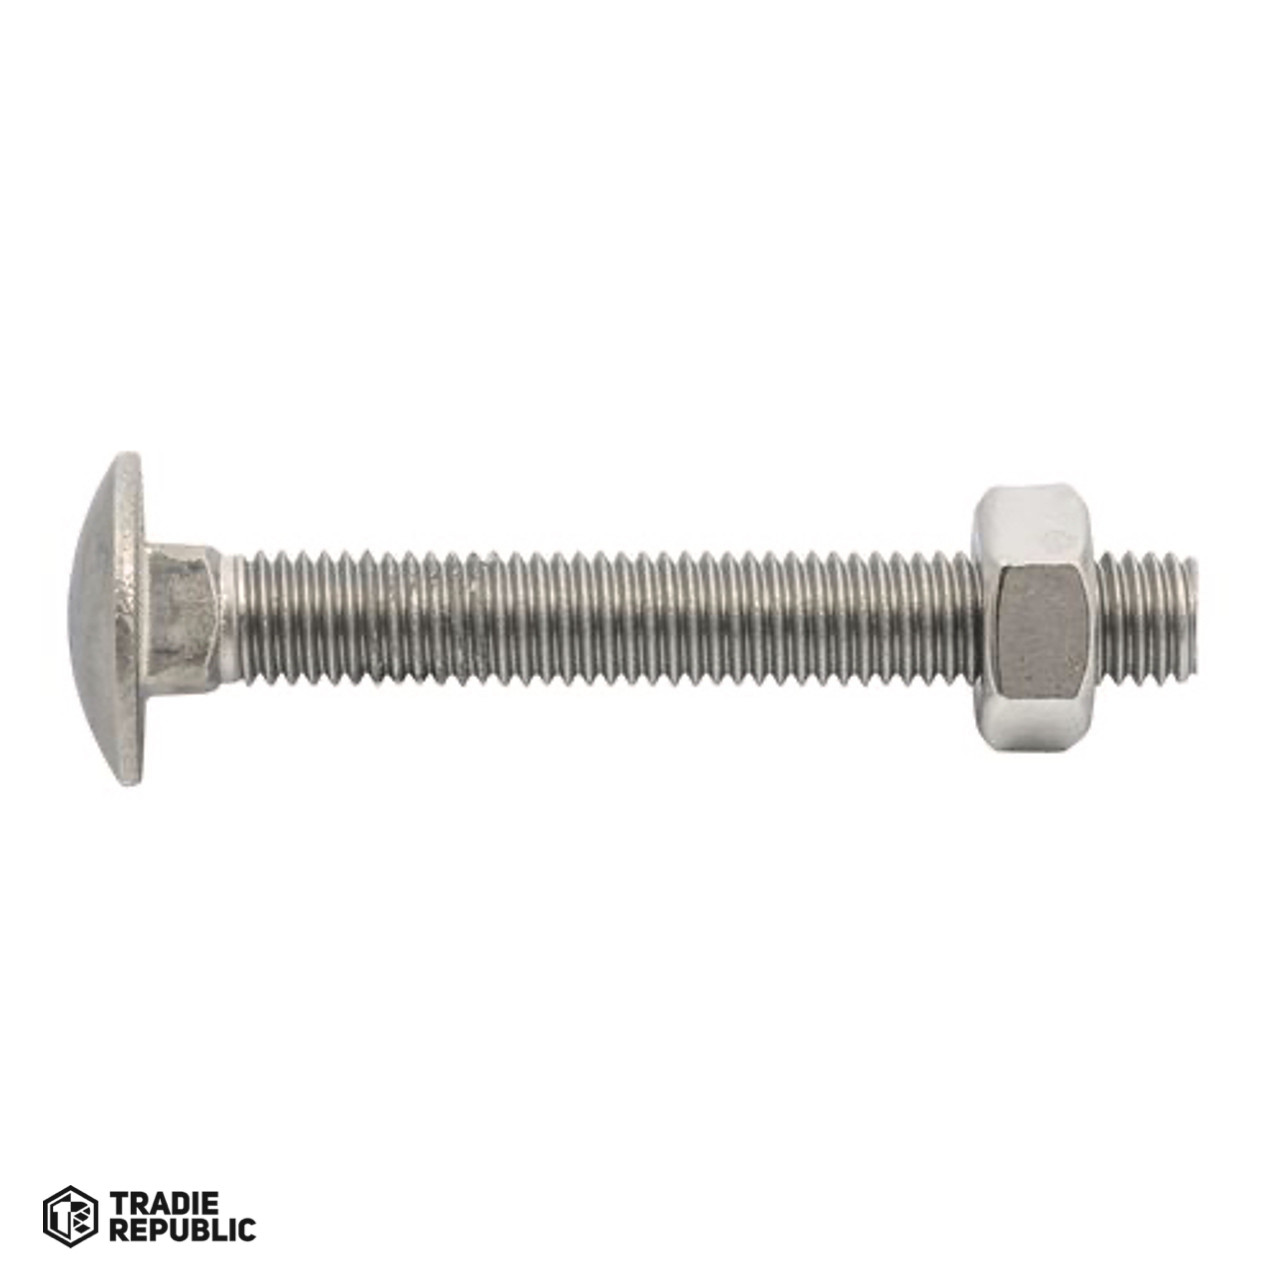 SSTCBN06025 SS 316 Coach Bolt And Nut